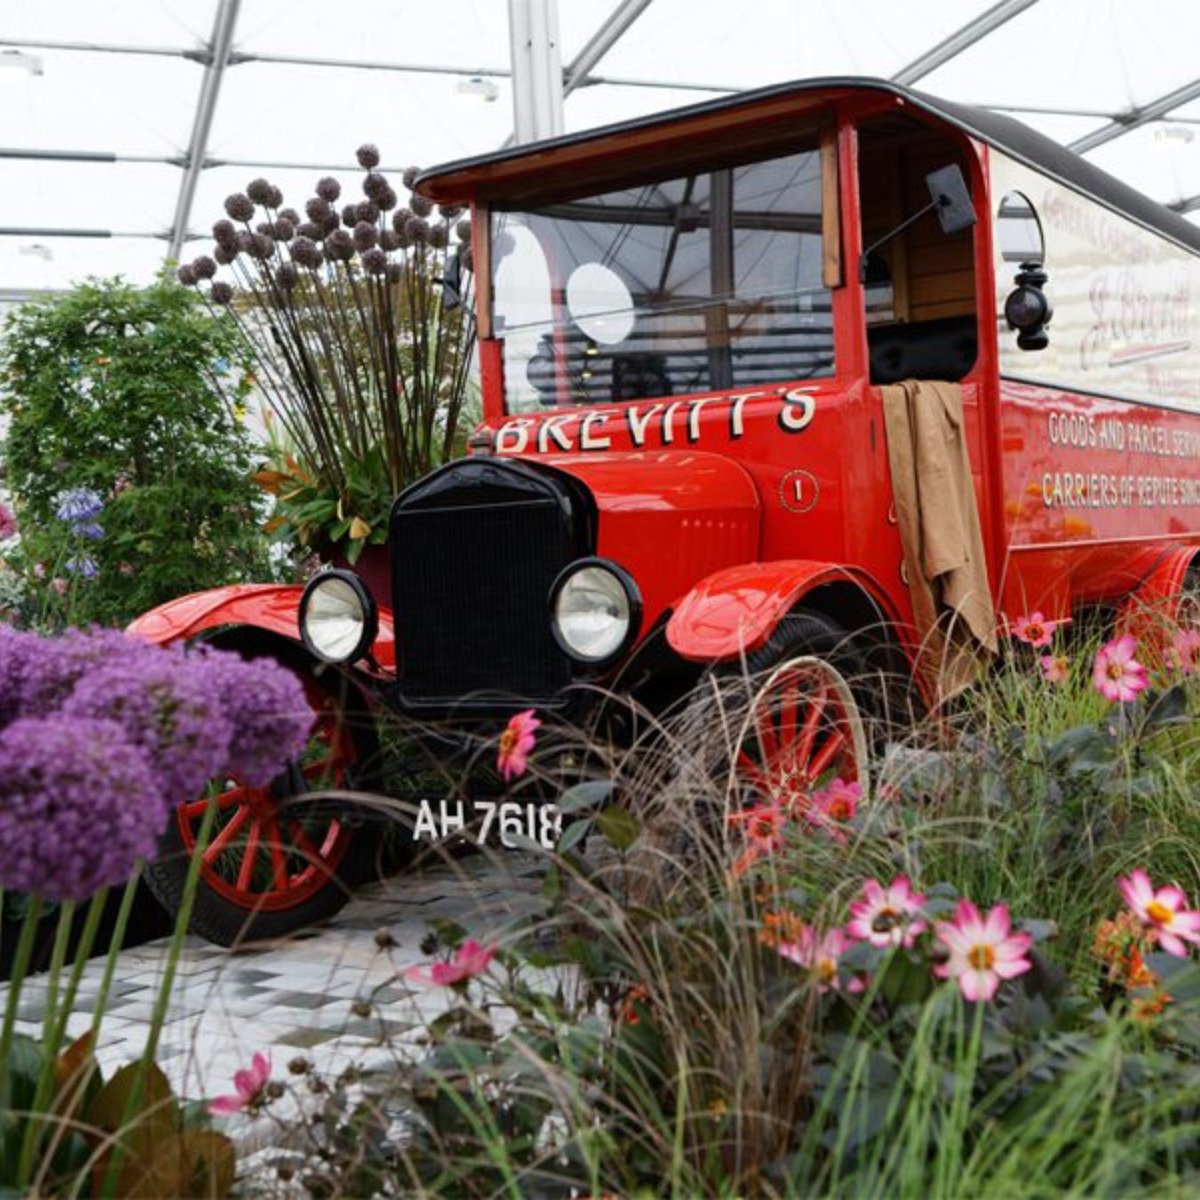 READER OFFER: @BBCGoodFoodShow & @BBCGWLive return to @thenec - and you can get discounted tickets! 🌸🍷 Get 20% off tickets using code WHAT20 at the checkout by 16 May. Book at 👉 bbcgardenersworldlive.com and goodfoodshow.com